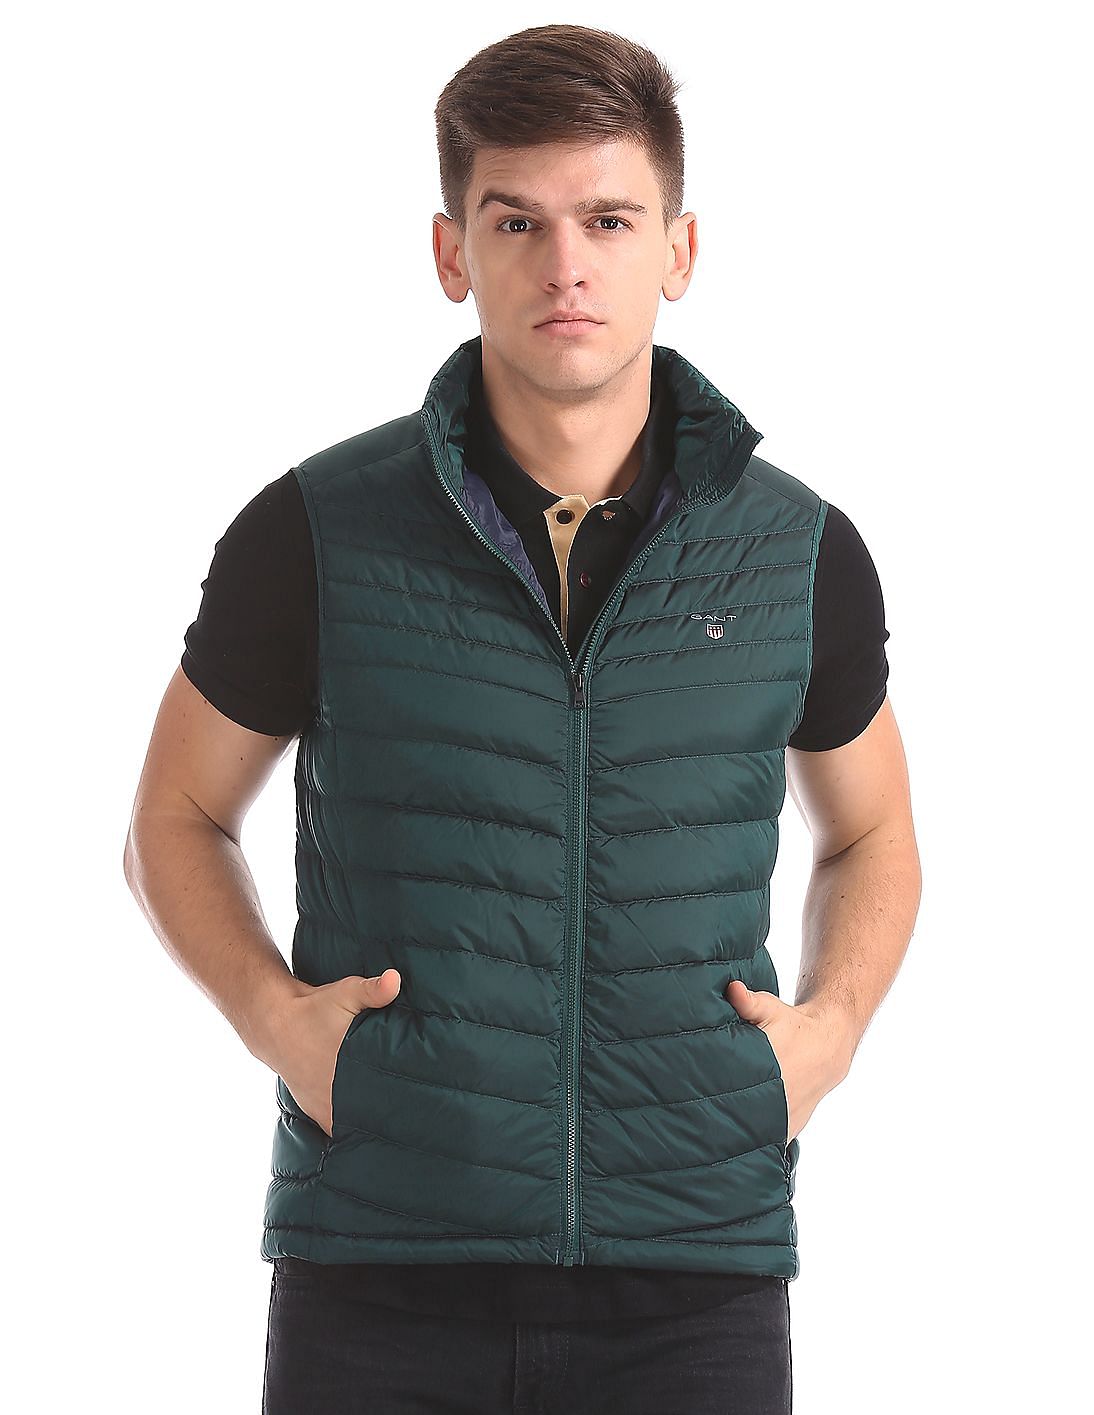 Buy Men The Airlight Down Vest online at NNNOW.com